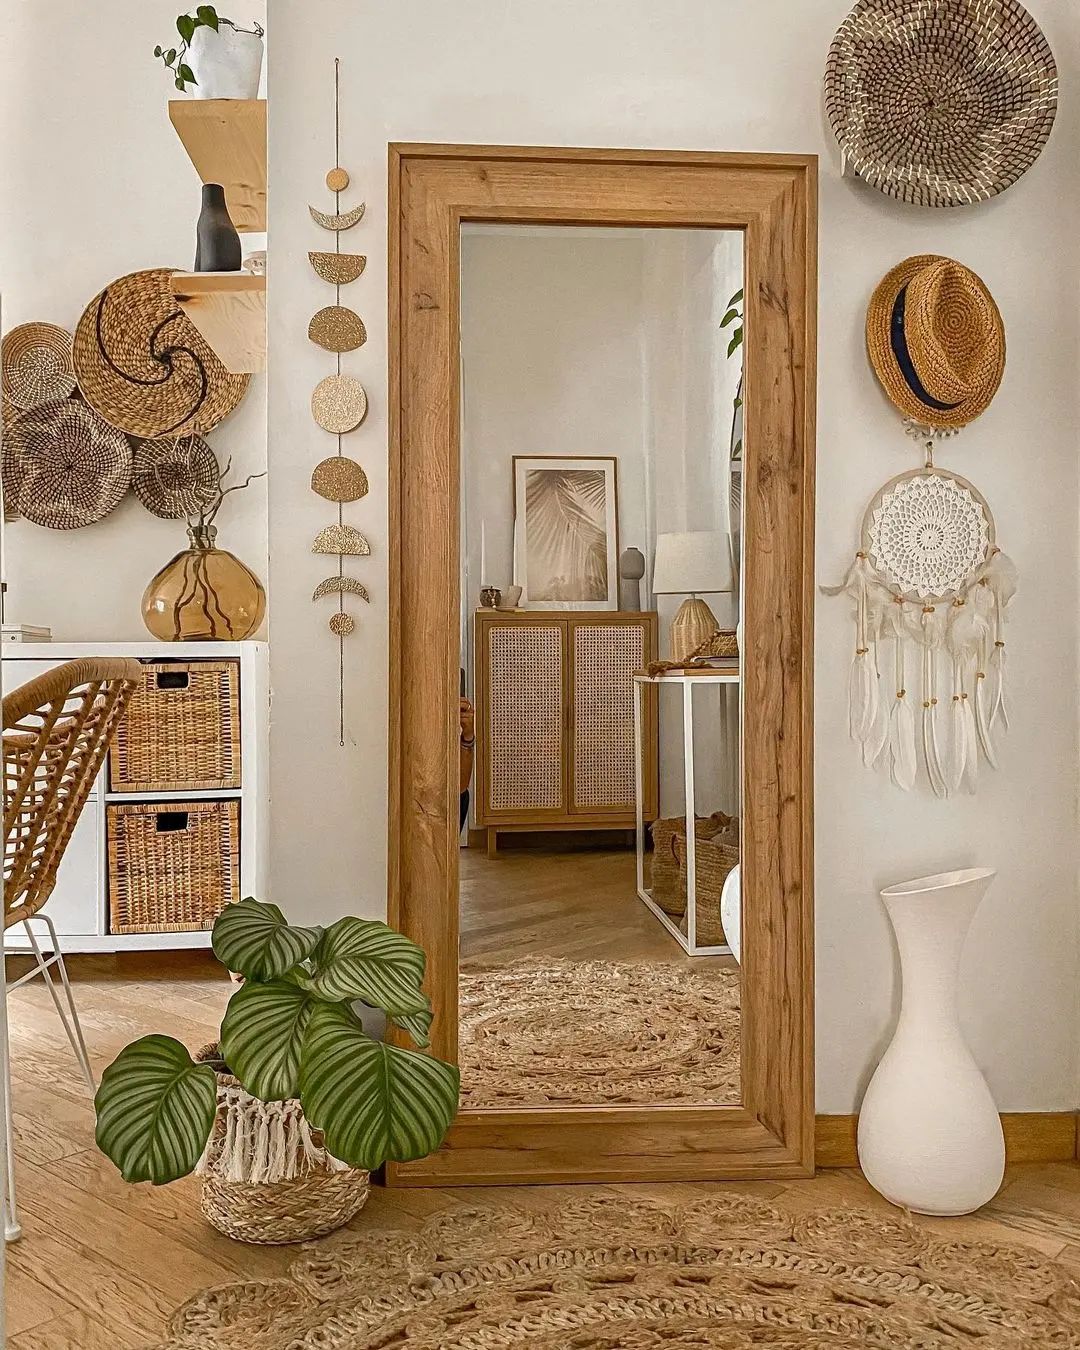 hats and baskets add visual interest and texture to this bohemian-inspired living area wall 